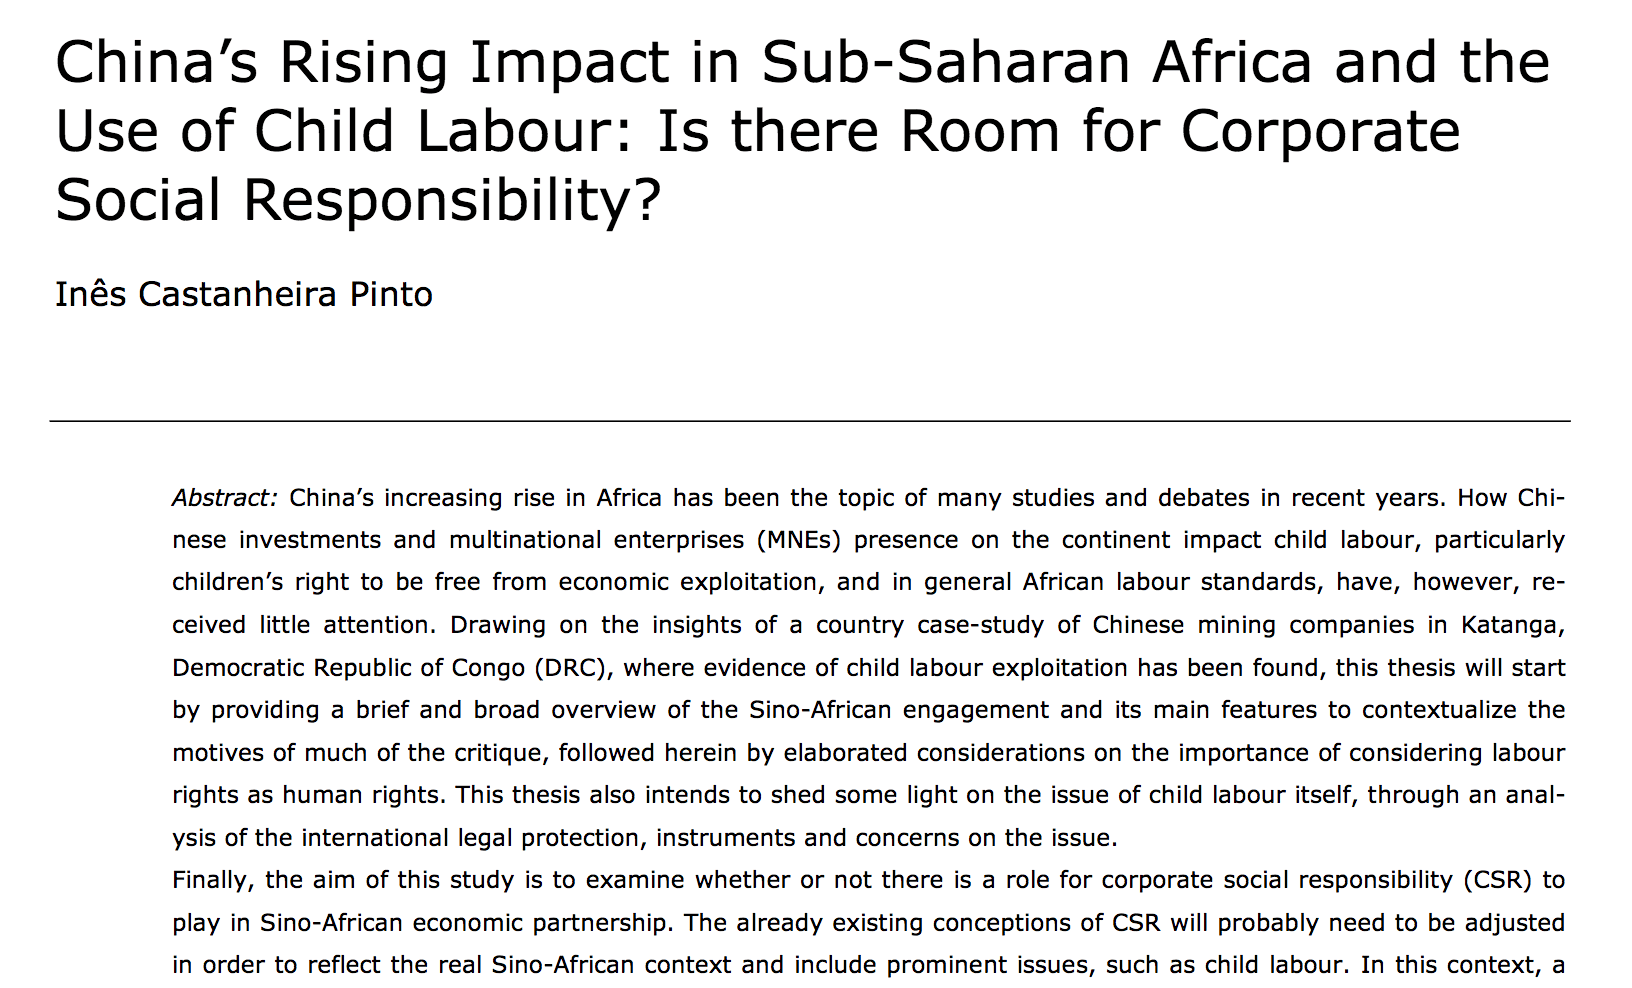 China’s Rising Impact in Sub-Saharan Africa and the Use of Child Labour: Is there Room for Corporate Social Responsibility?